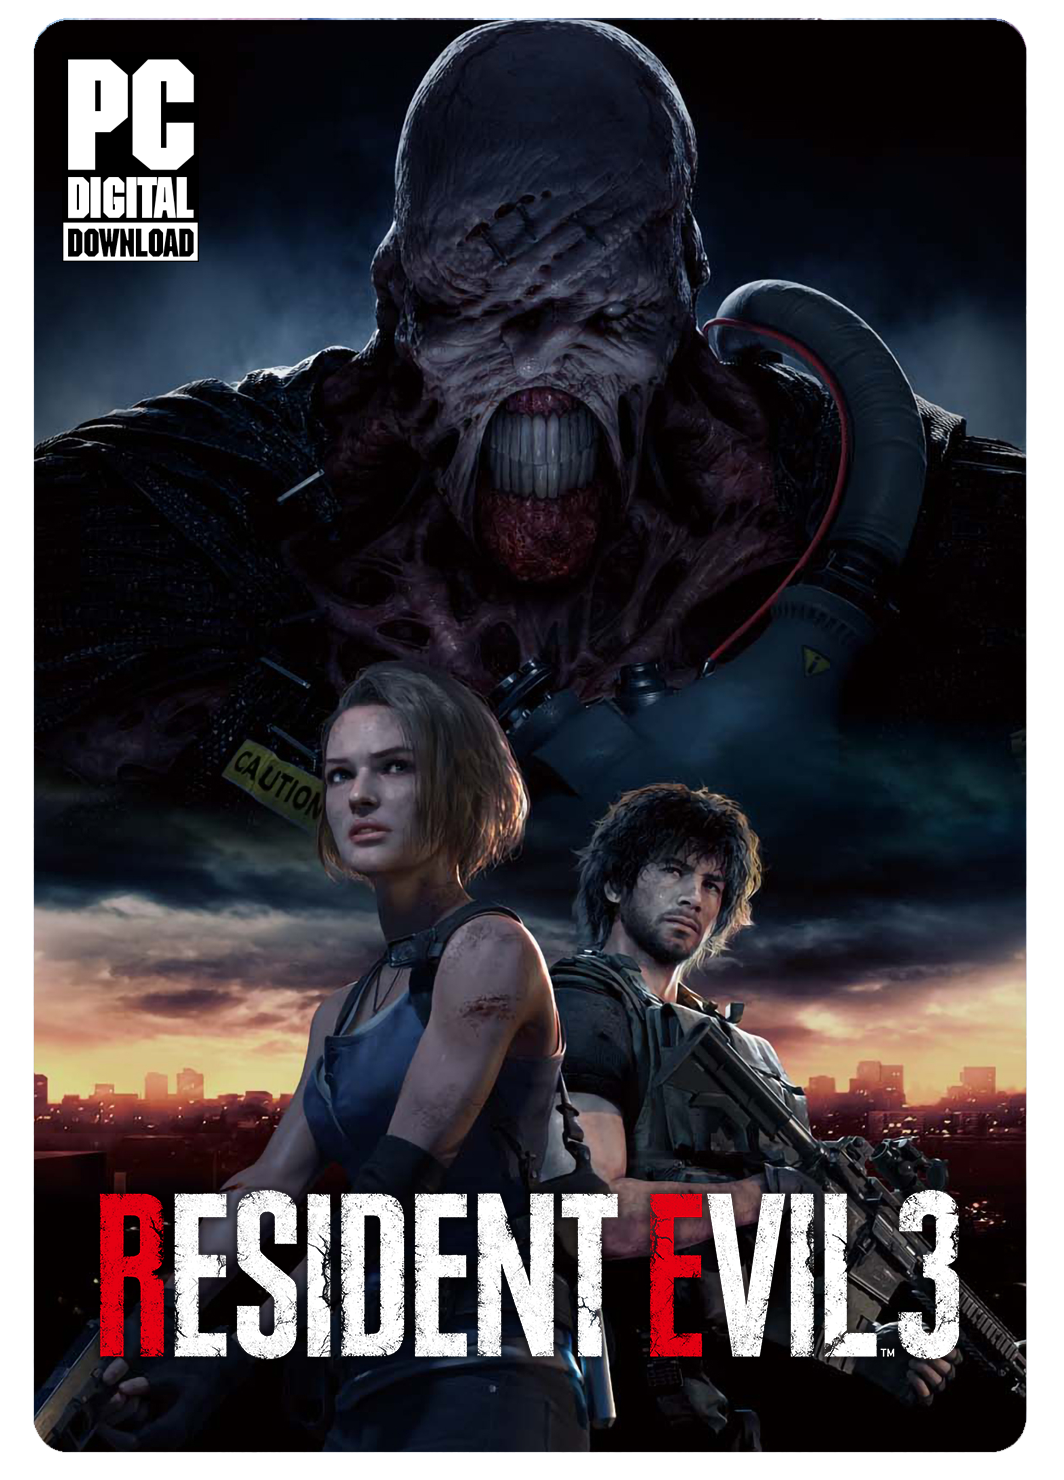 resident evil 3 pc requirements